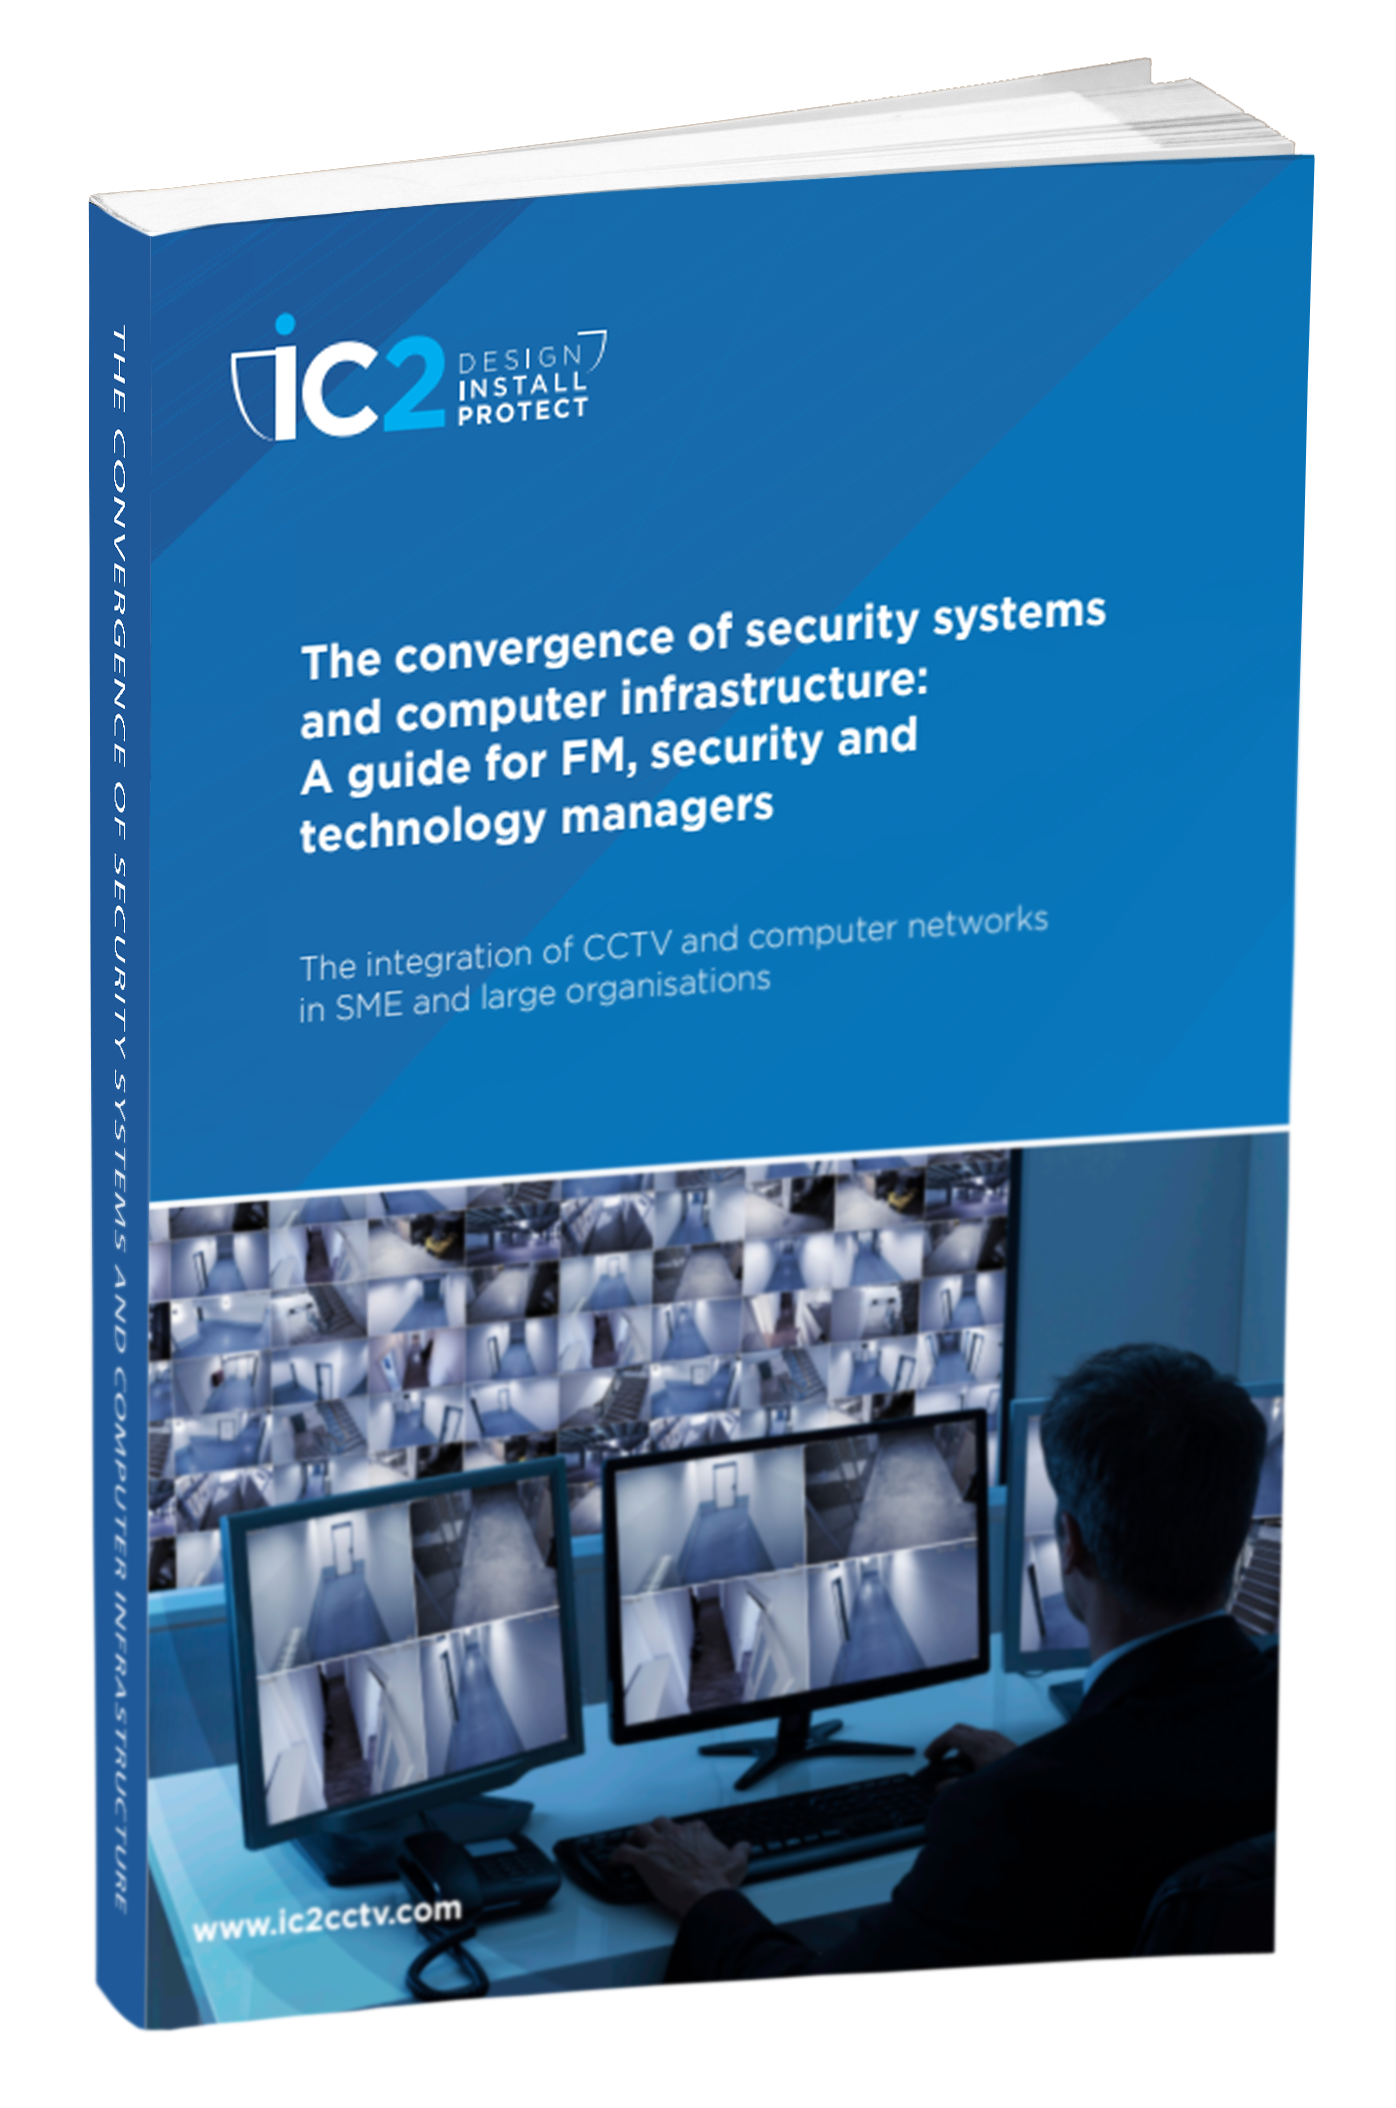 The Convergence Of Security Systems And Computer Infrastructure Ebook Cover Guide